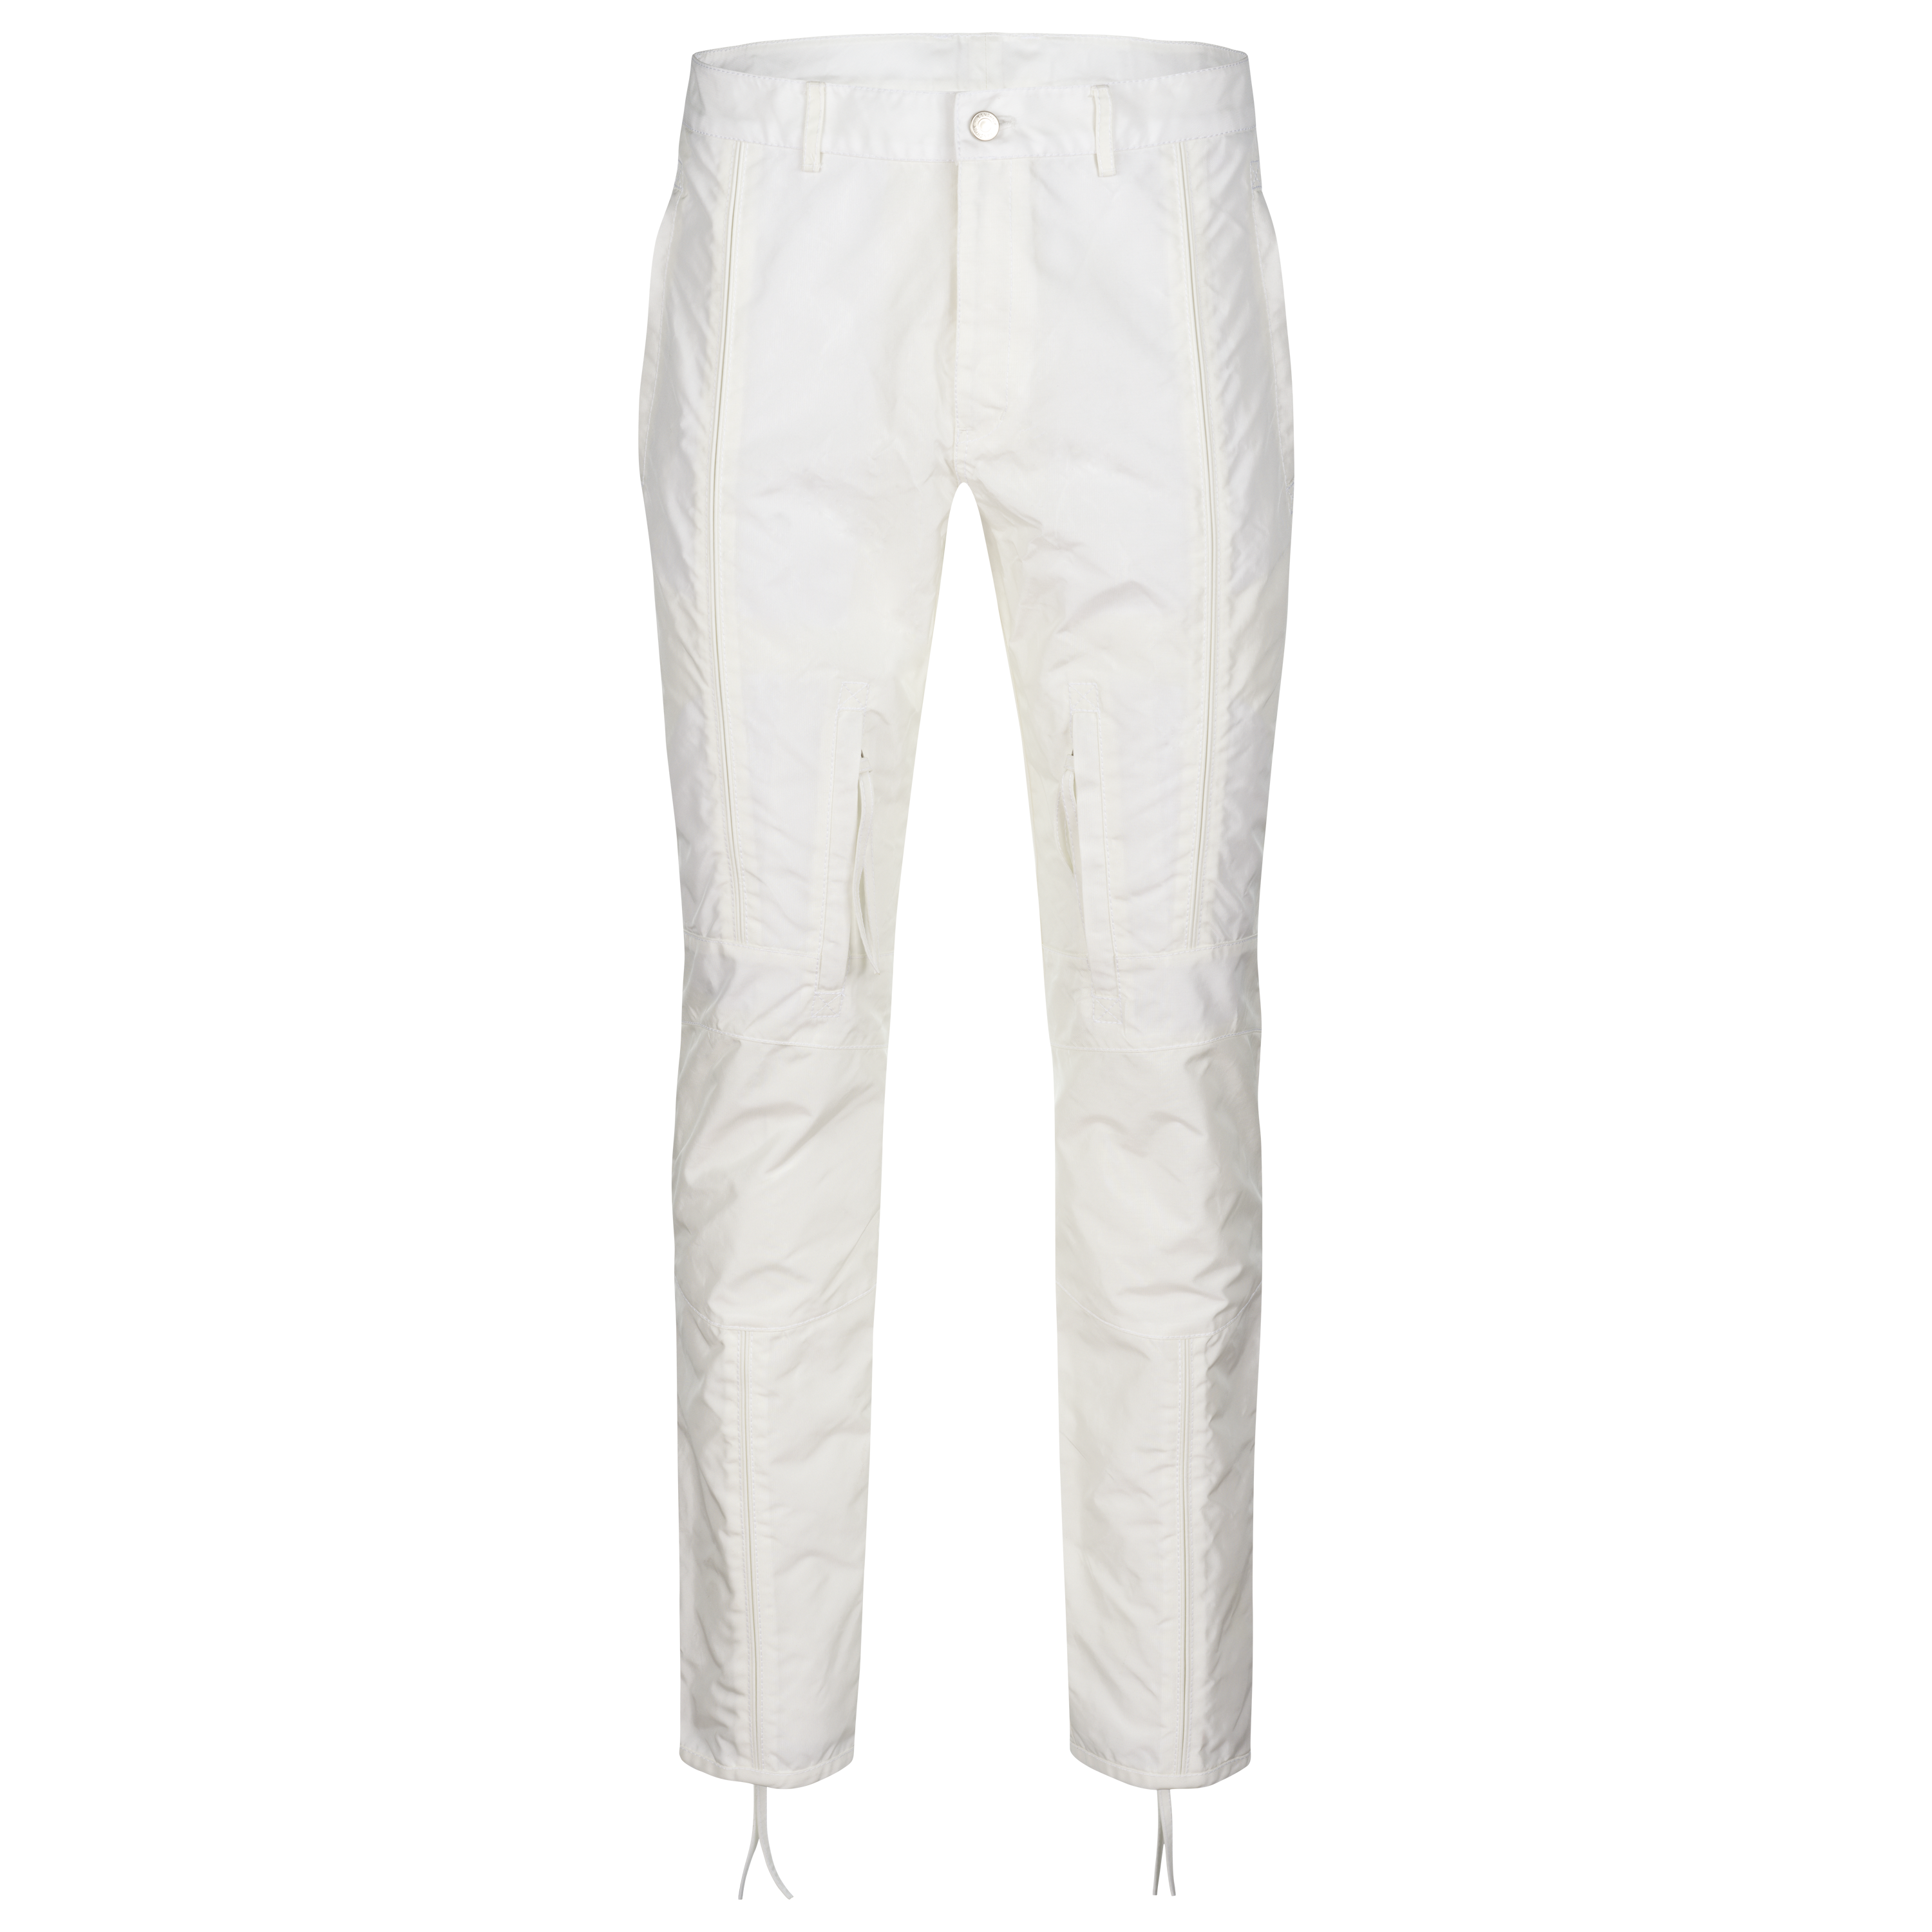 LOCK STITCHED ASTRONAUT PANTS OFF WHITE